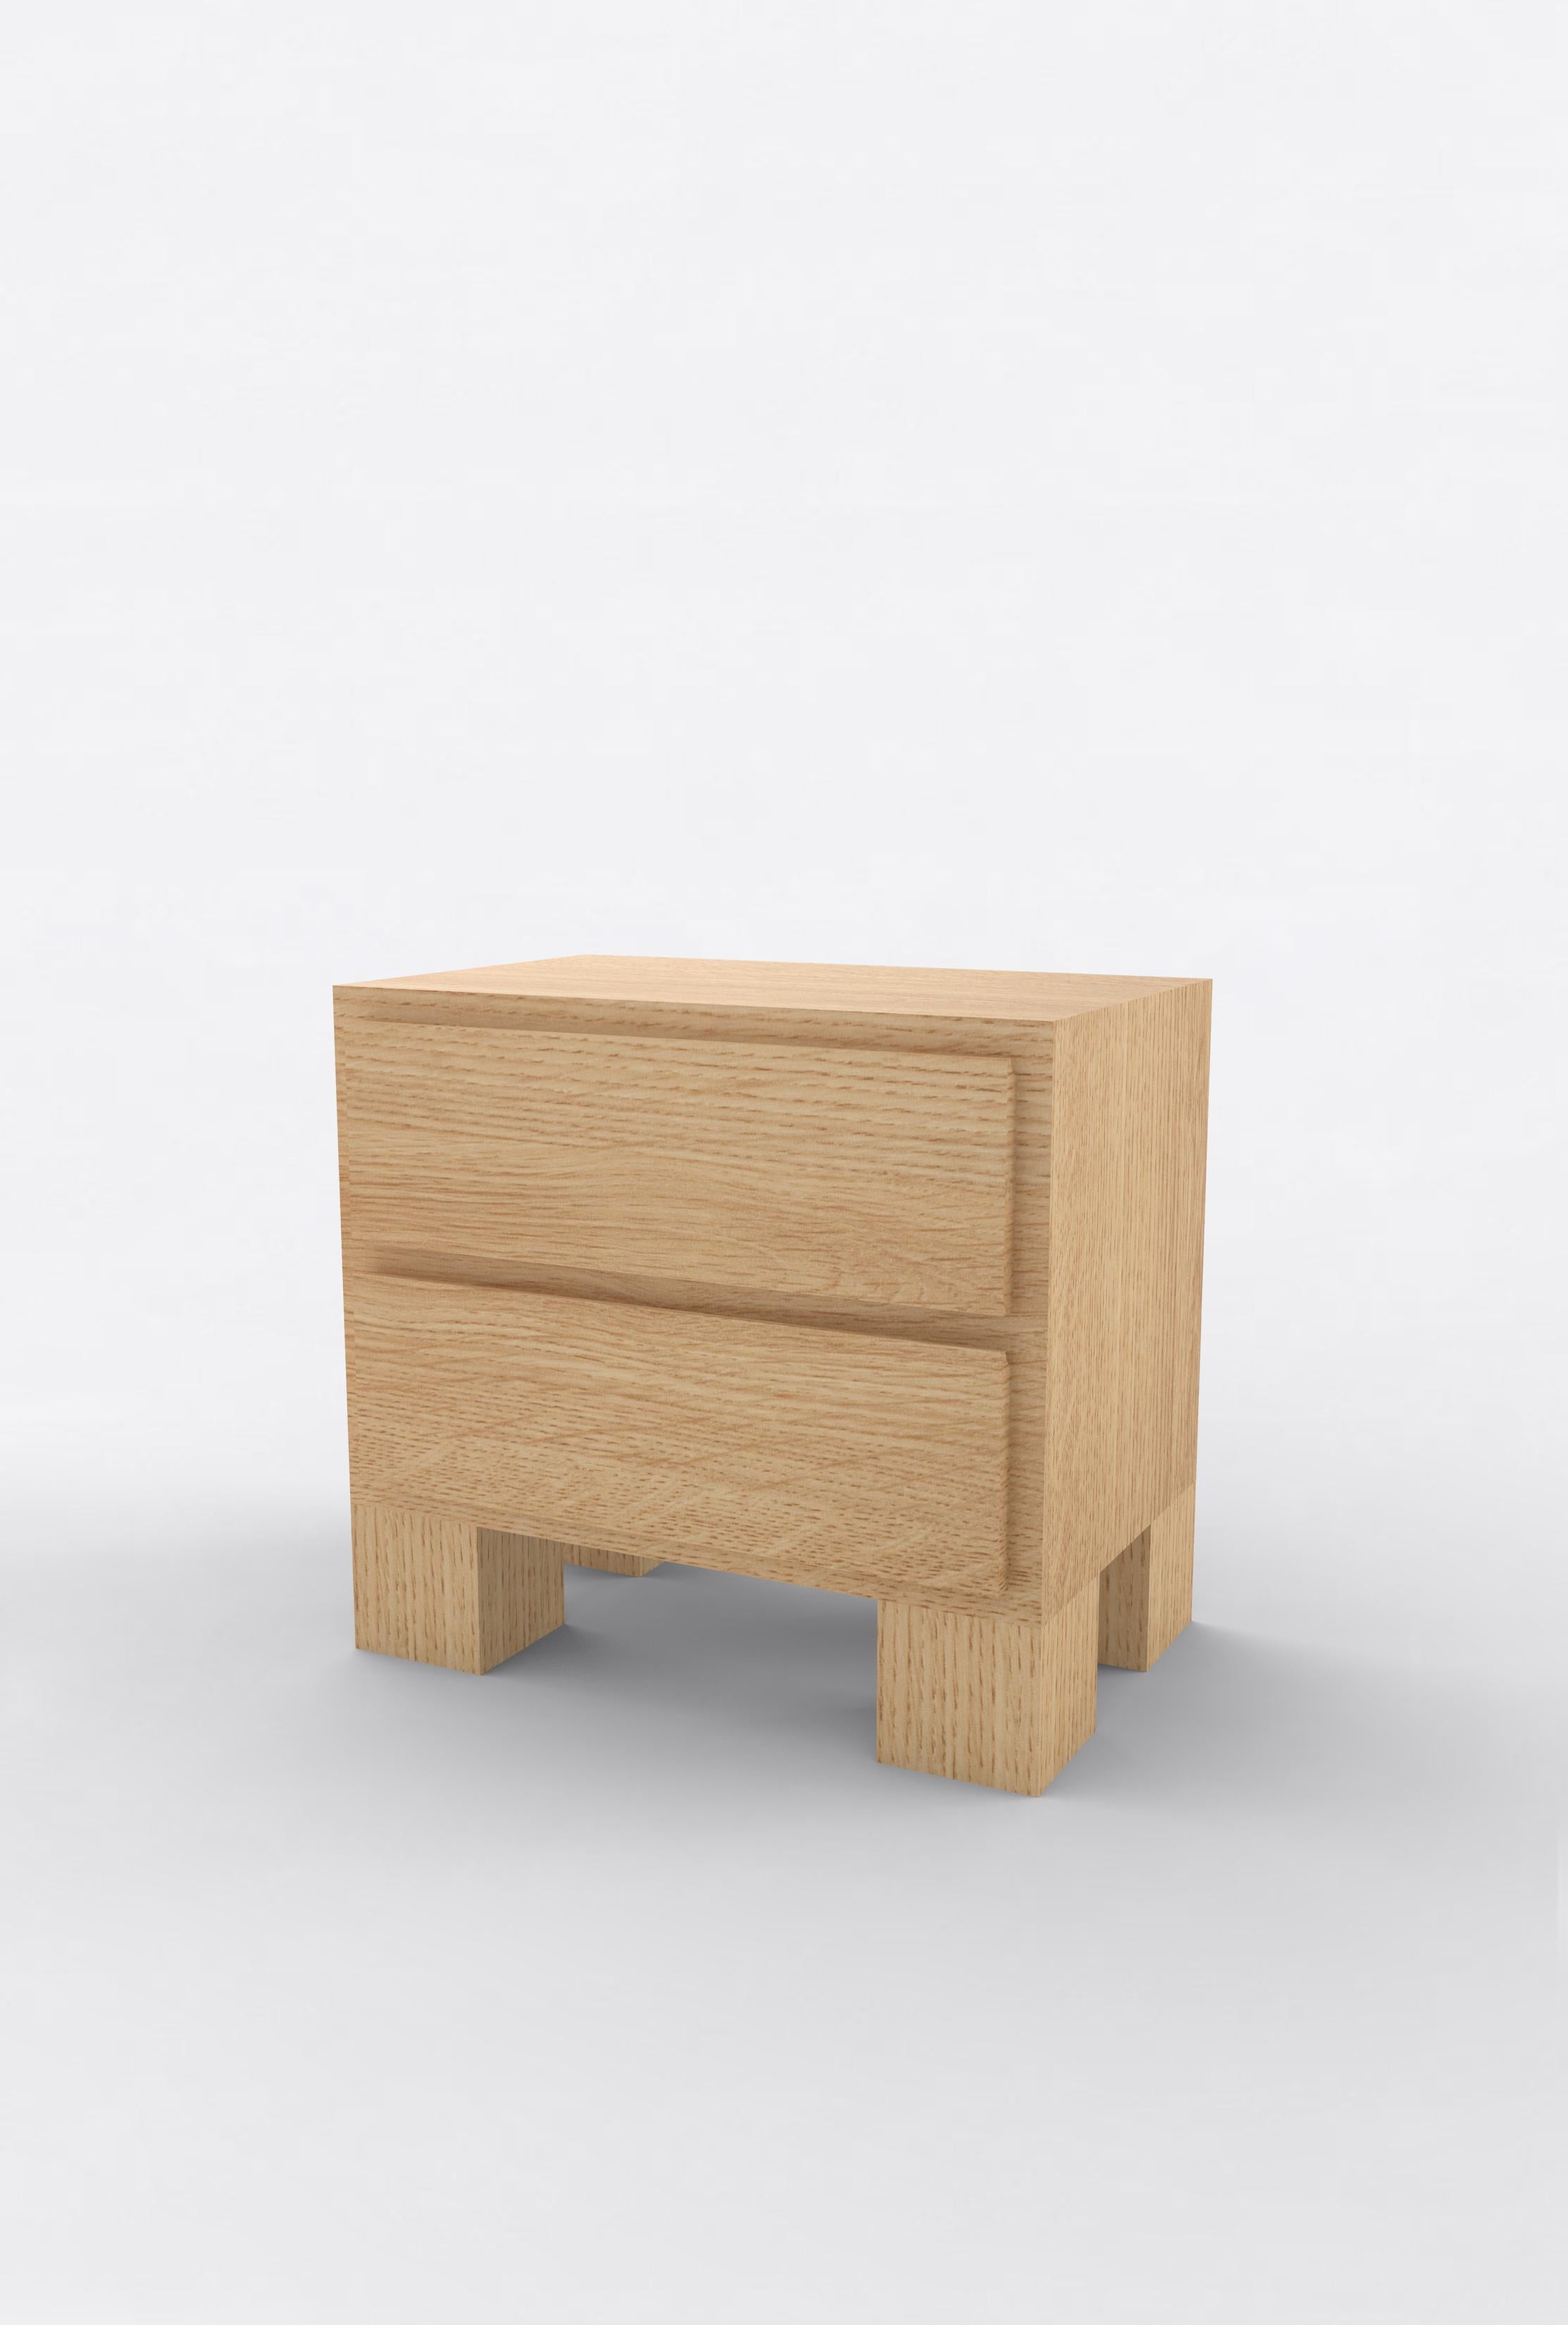 Orphan Work 101 Bedside
Shown in oak.
Available in natural oak.
Measures: 24” W x 15” D x 22” H
2 drawers

Orphan work is designed to complement in the heart of Soho, New York City. Each piece is handmade in New York and Los Angeles by traditional